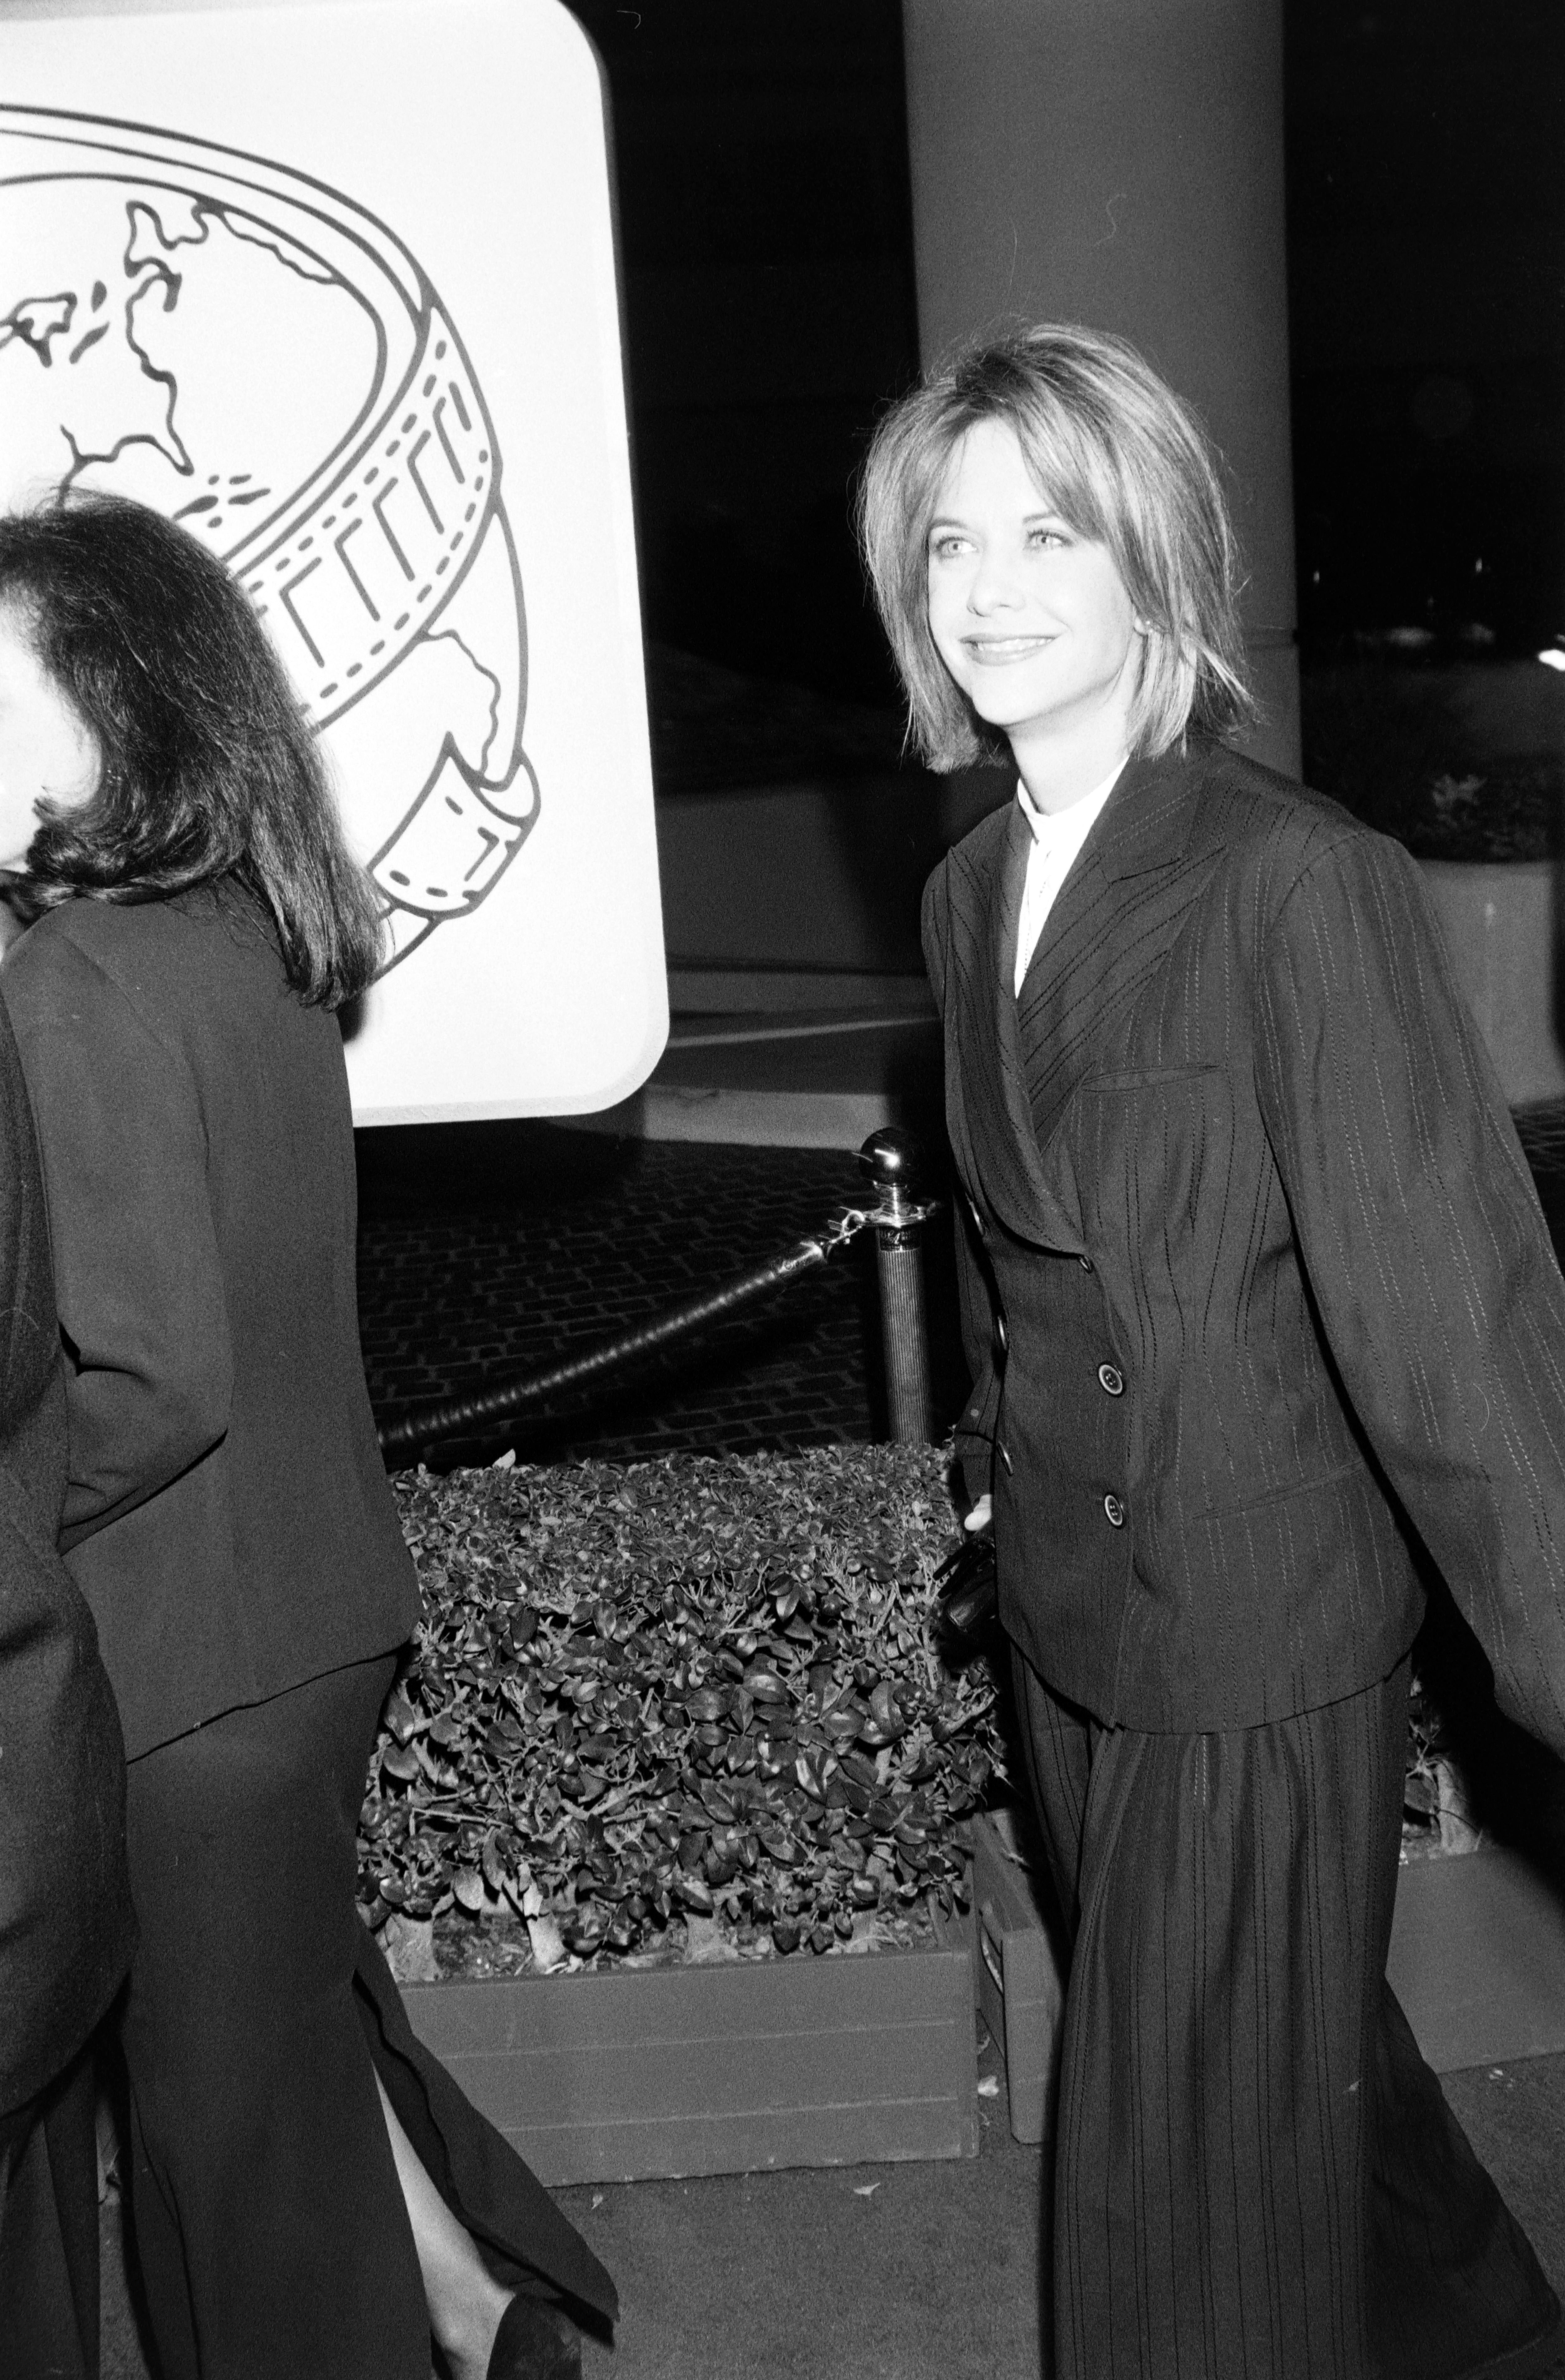 Meg Ryan attends the 51st Annual Golden Globe Awards on January 22, 1994 in Beverly Hills, California. | Source: Getty Images